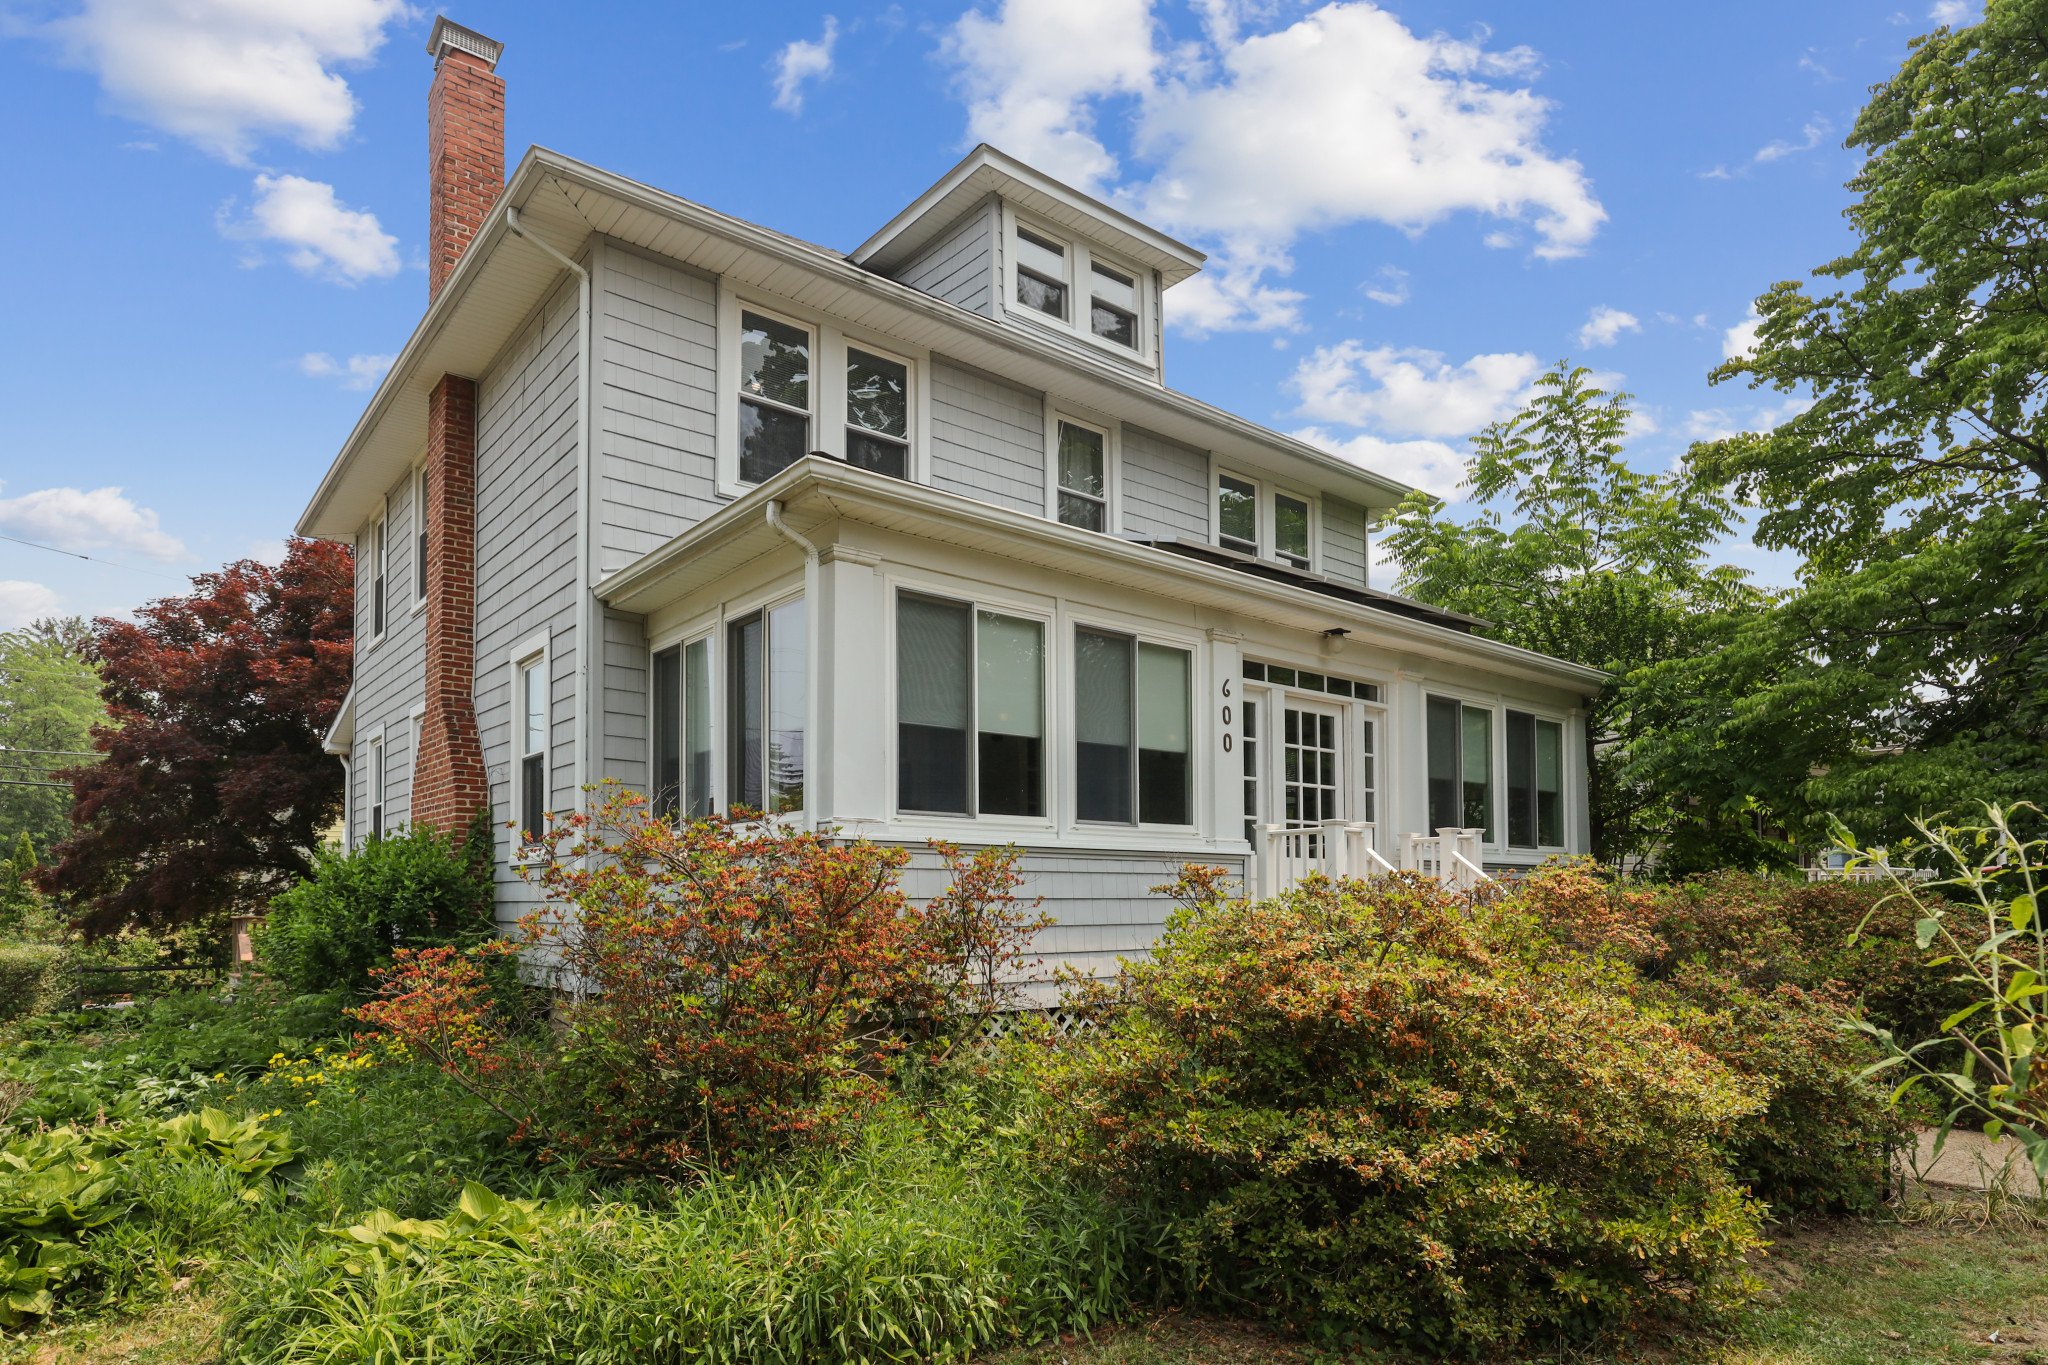 SOLD / 600 Dunkirk Rd / Baltimore, MD 21212